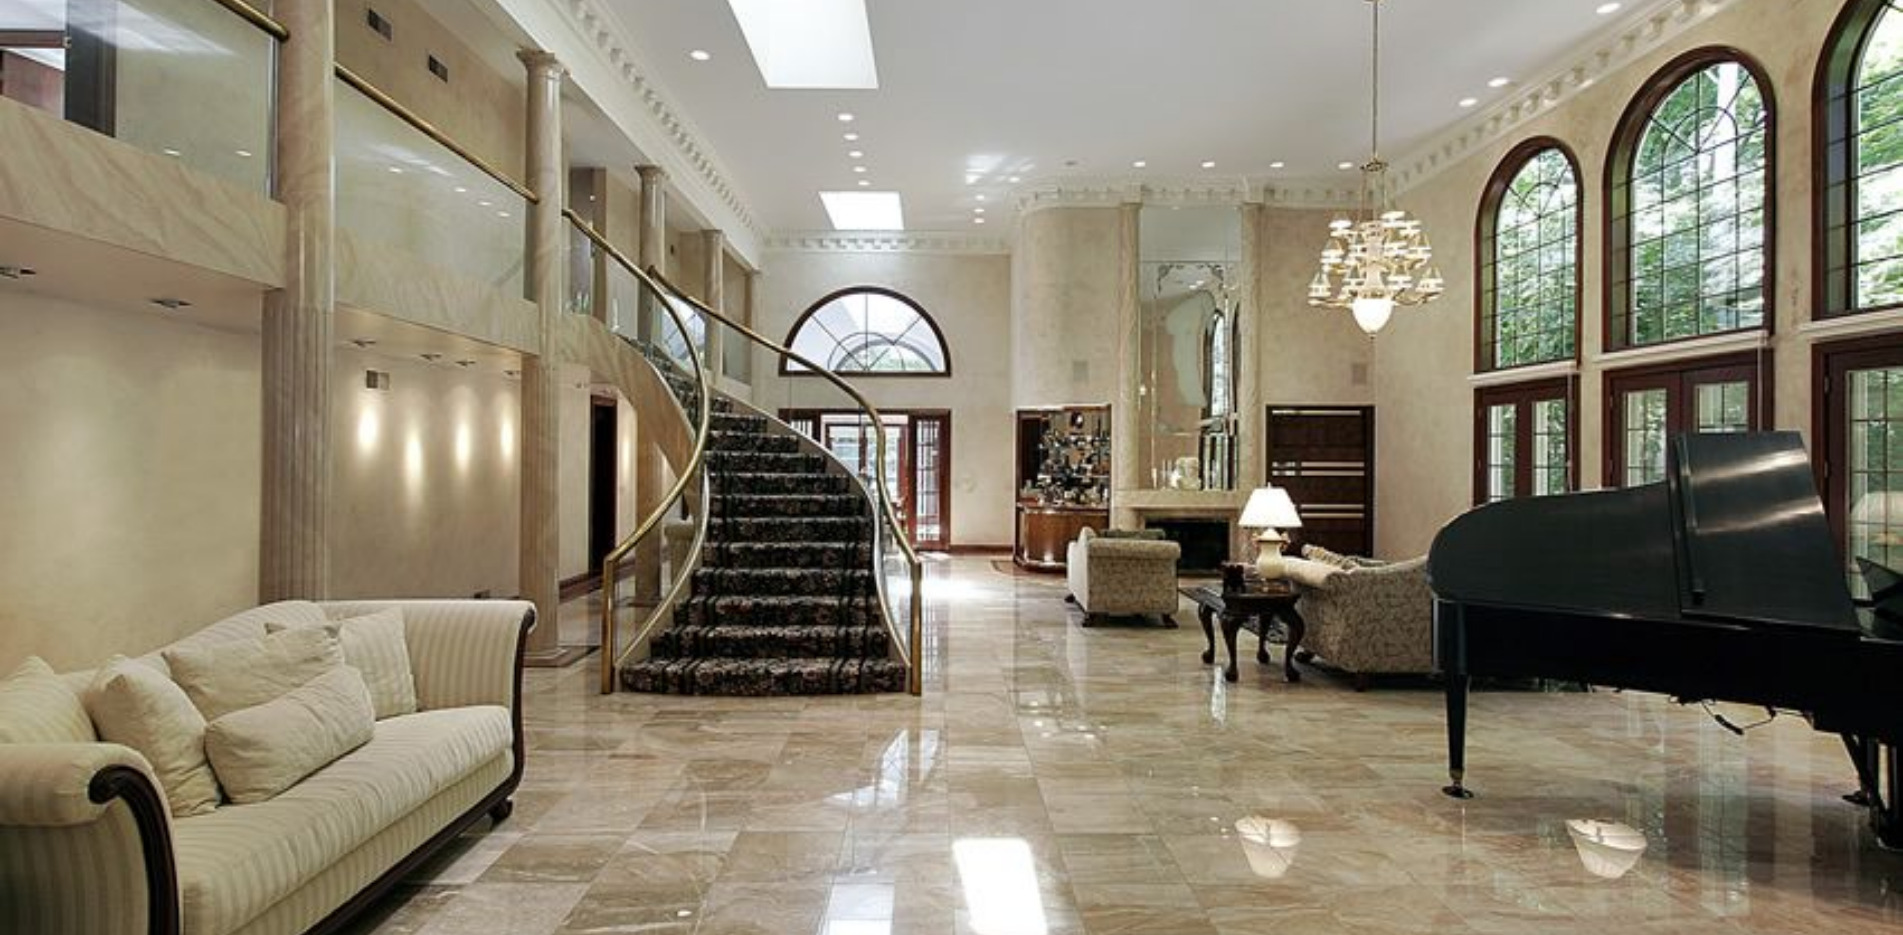  - The Best Decorative Marble Designs For All Your Interior Designs